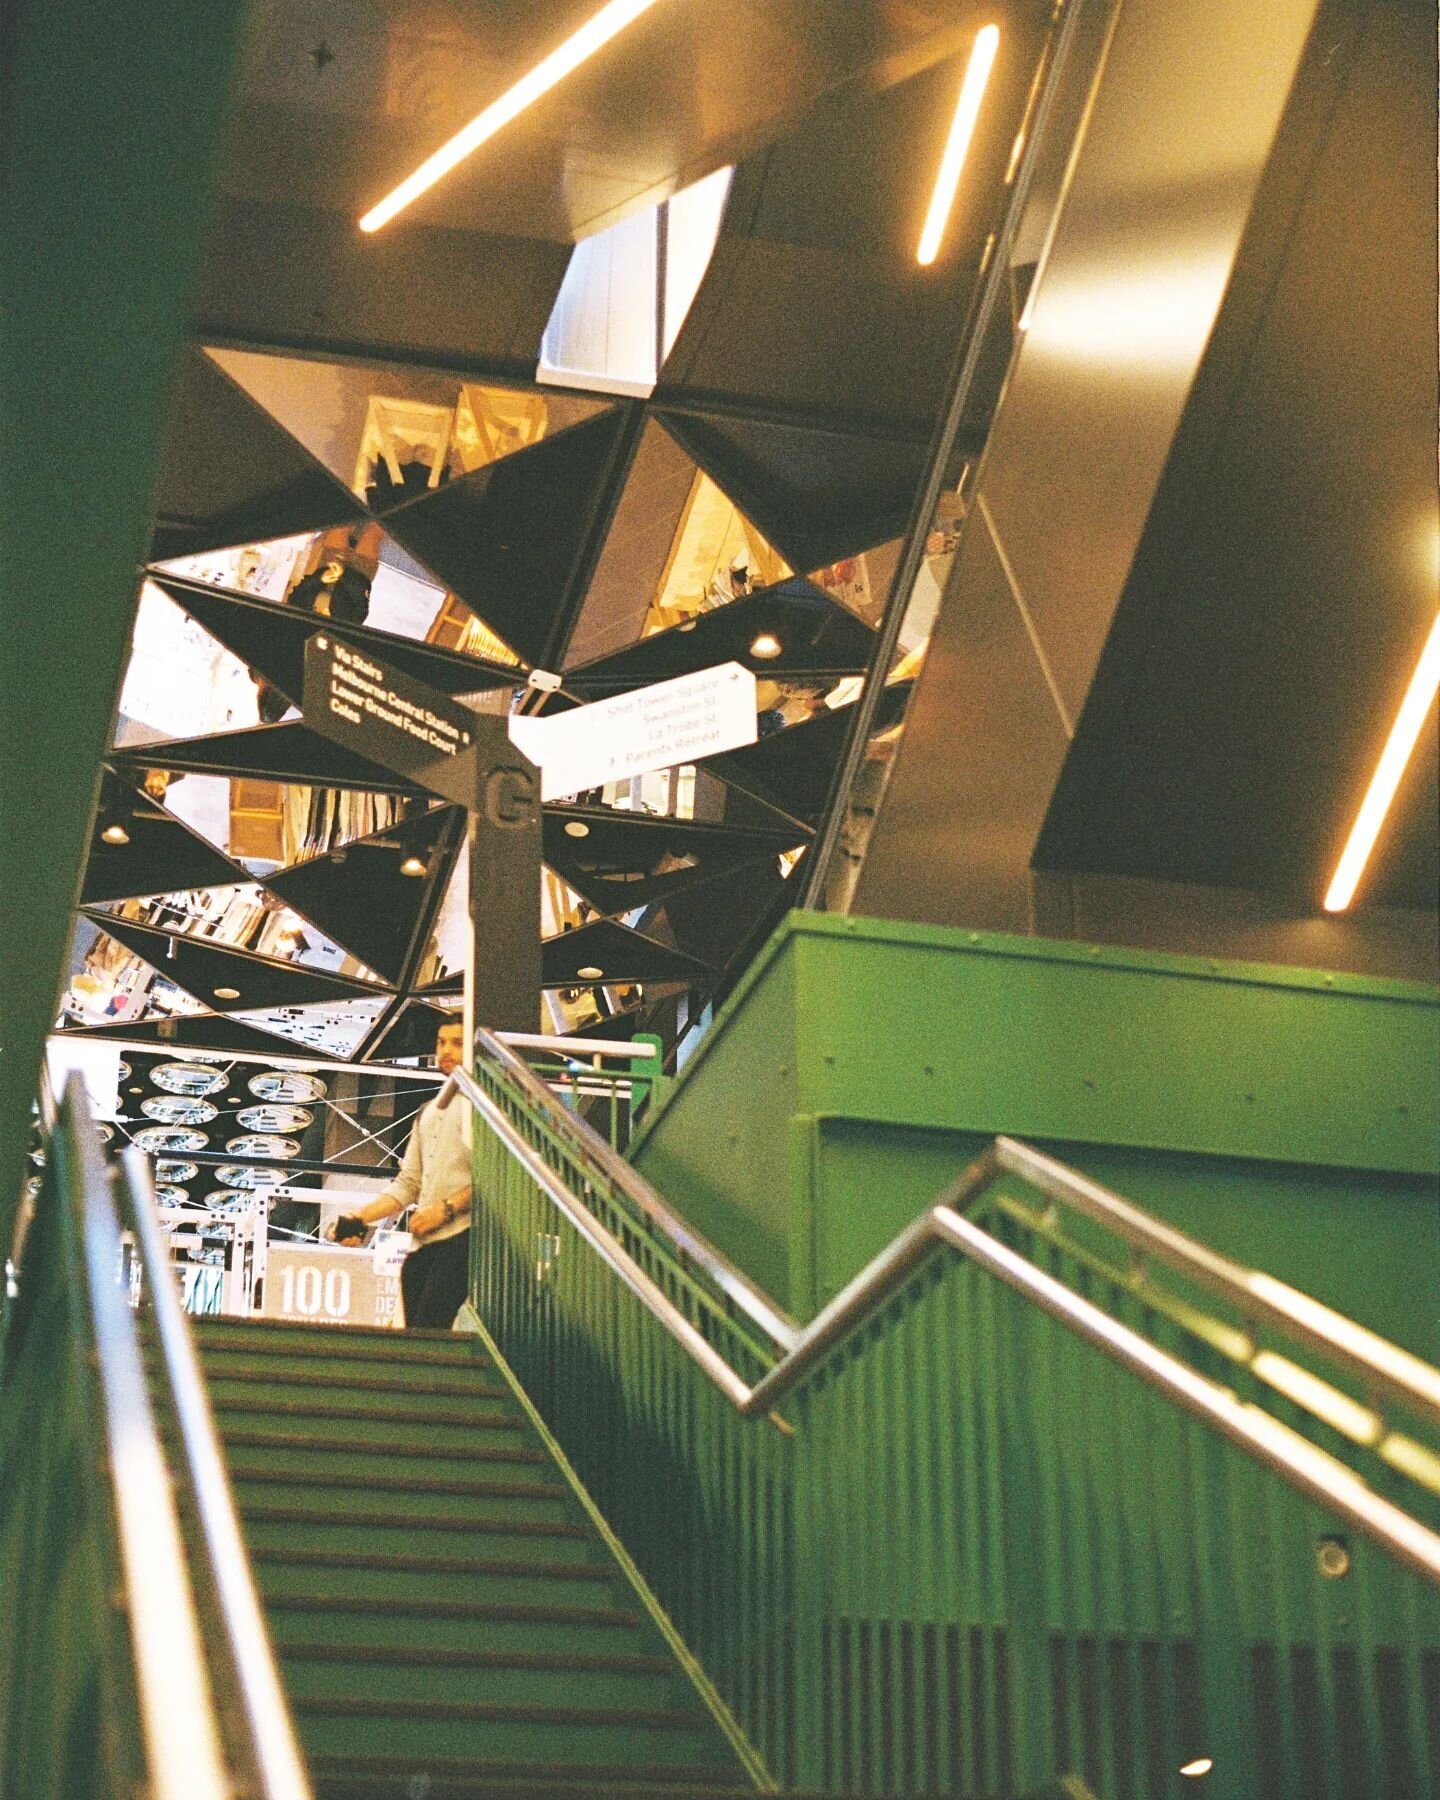 Staircase inside @melbournecentral from early February. Finally developed a couple more rolls, one Gold 200 and one Ultramax 400 and definitely have some nice shots to sift through
📷: Minolta X-500
🔎: MD Rokkor 50mm F1.4
🎞️: Kodak Ultramax 400
&bu